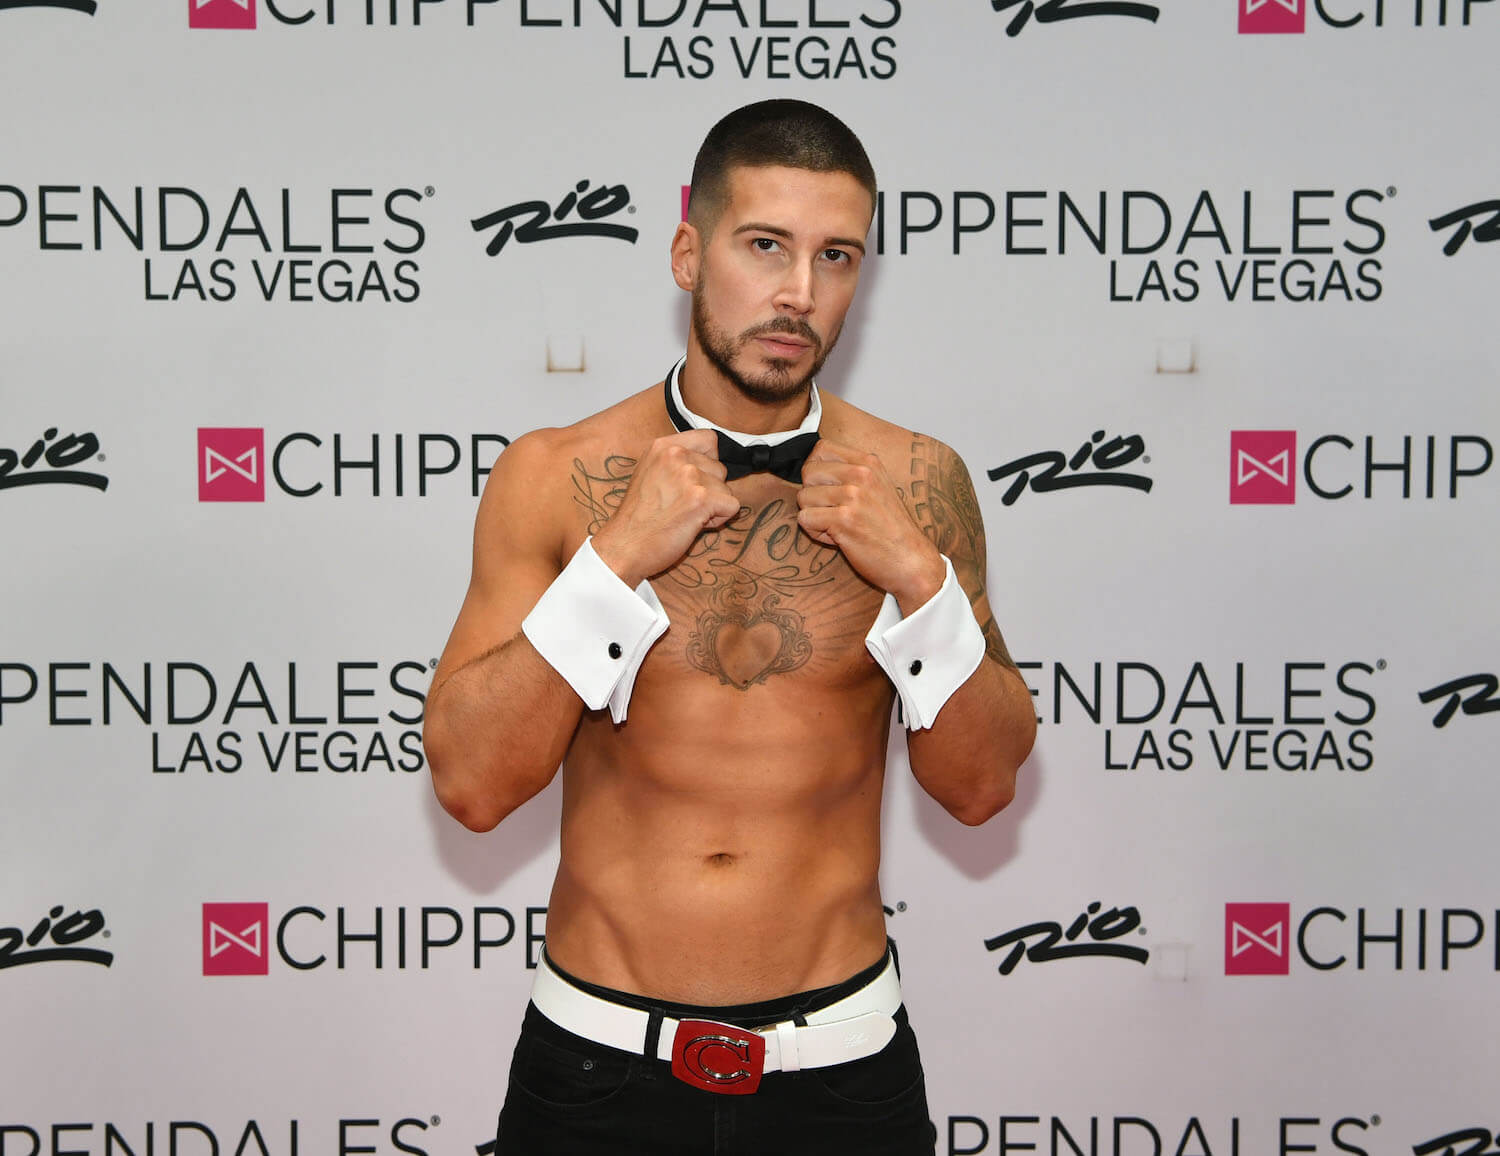 'Jersey Shore: Family Vacation' star Vinny Guadagnino shirtless at a Chippendale event